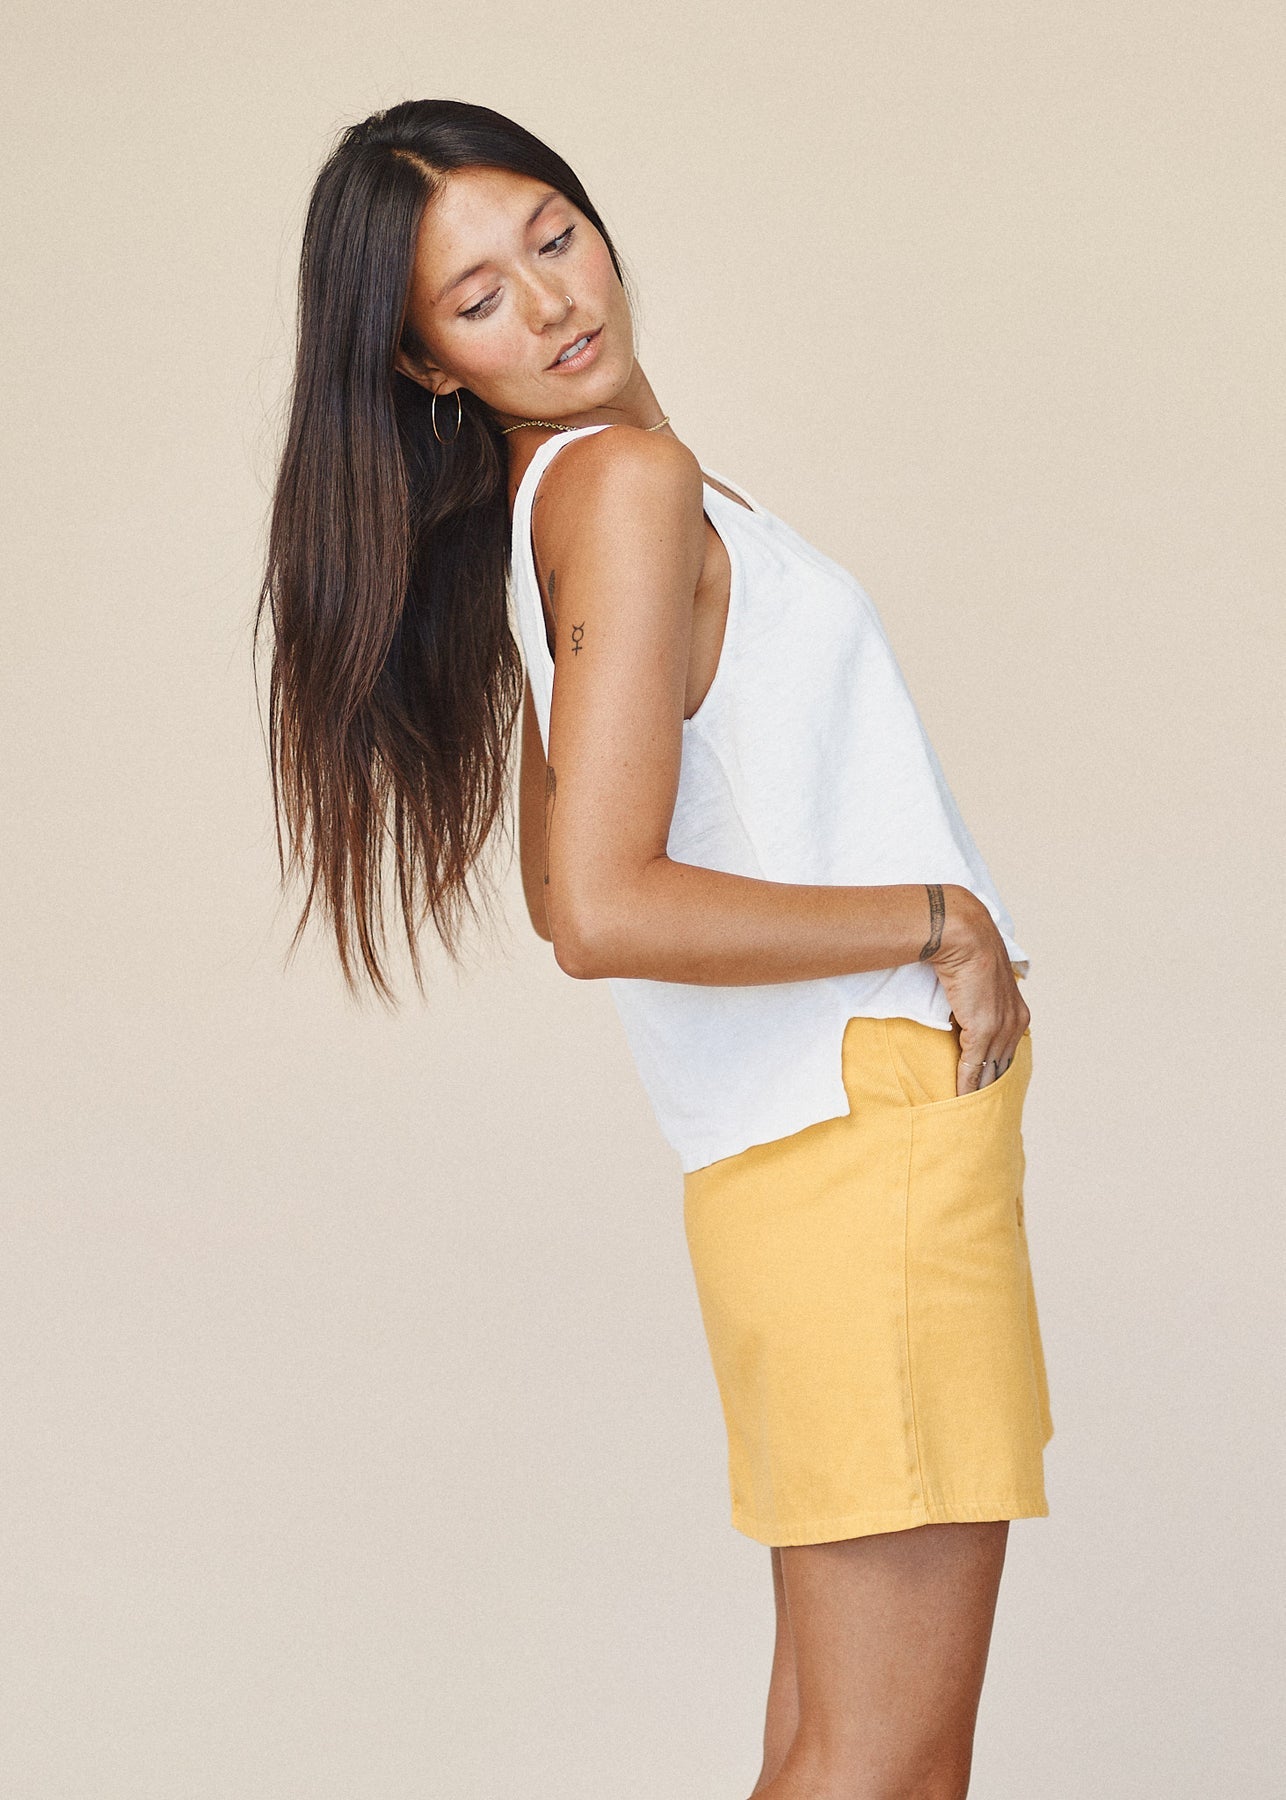 Classic button-down skirt. Fitted cut can be perfectly paired with a tucked, oversized top for effortless chic. 55% hemp, 45% organic cotton twill. Made with love in California.